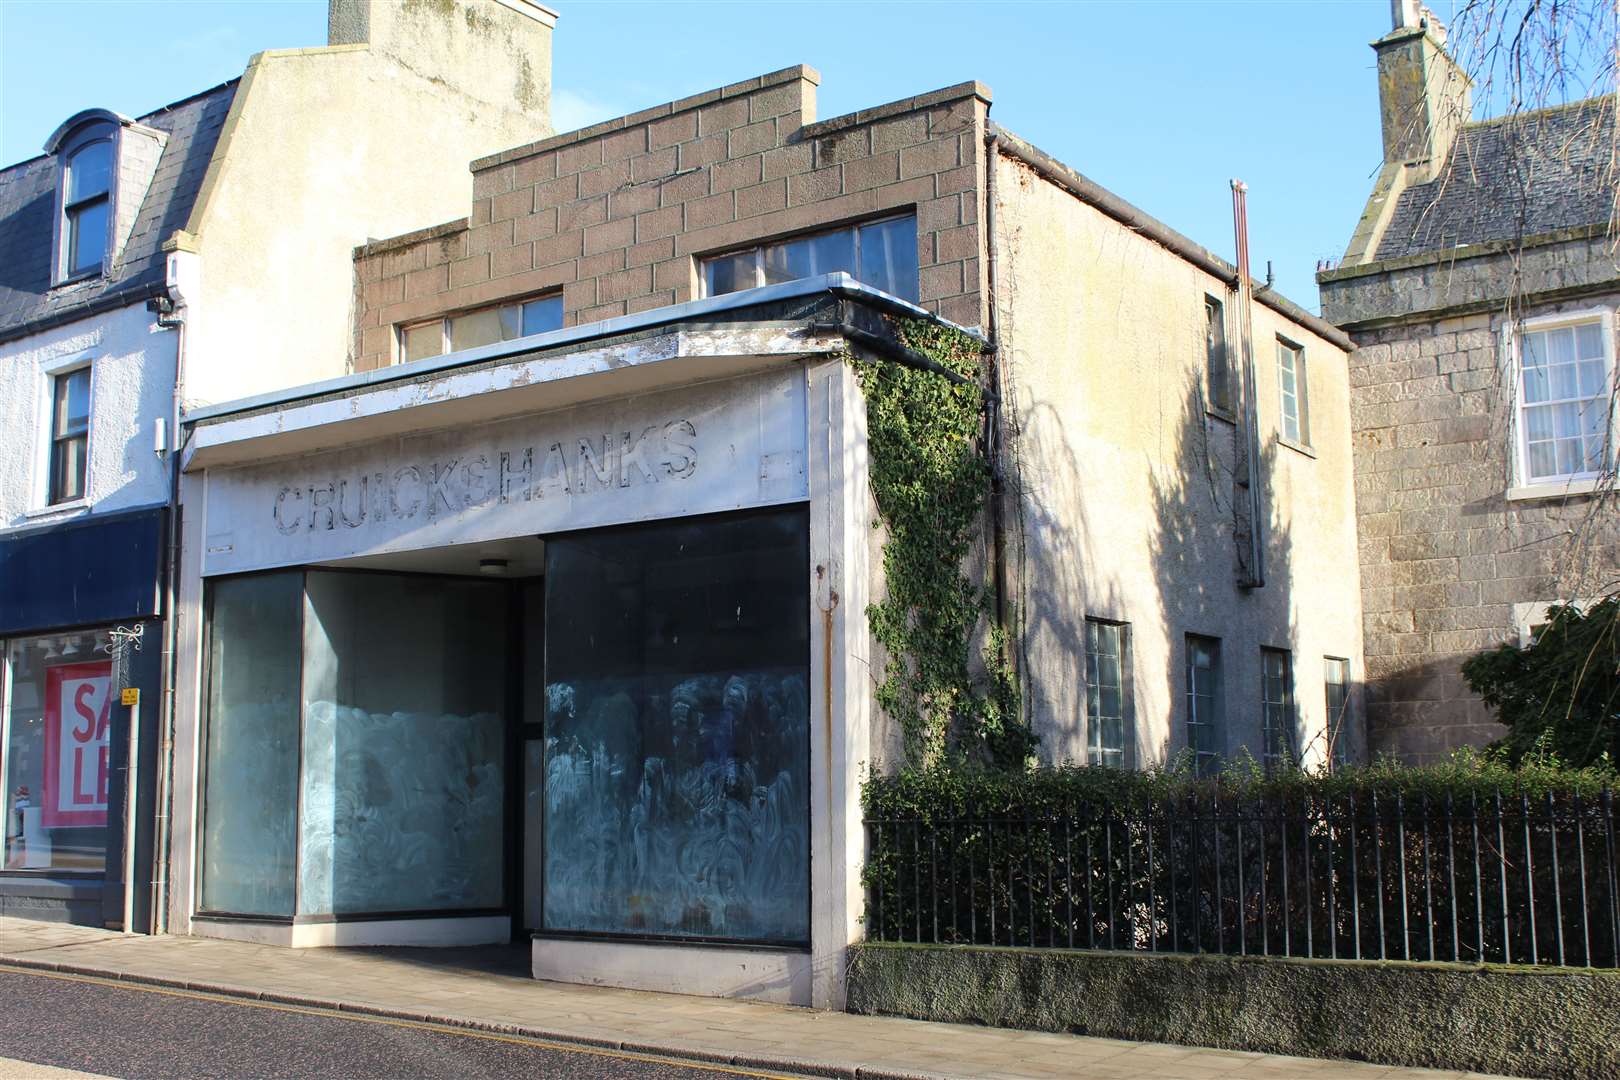 Plans to turn the former Cruickshanks building into flats and alter the retail space have been refused.